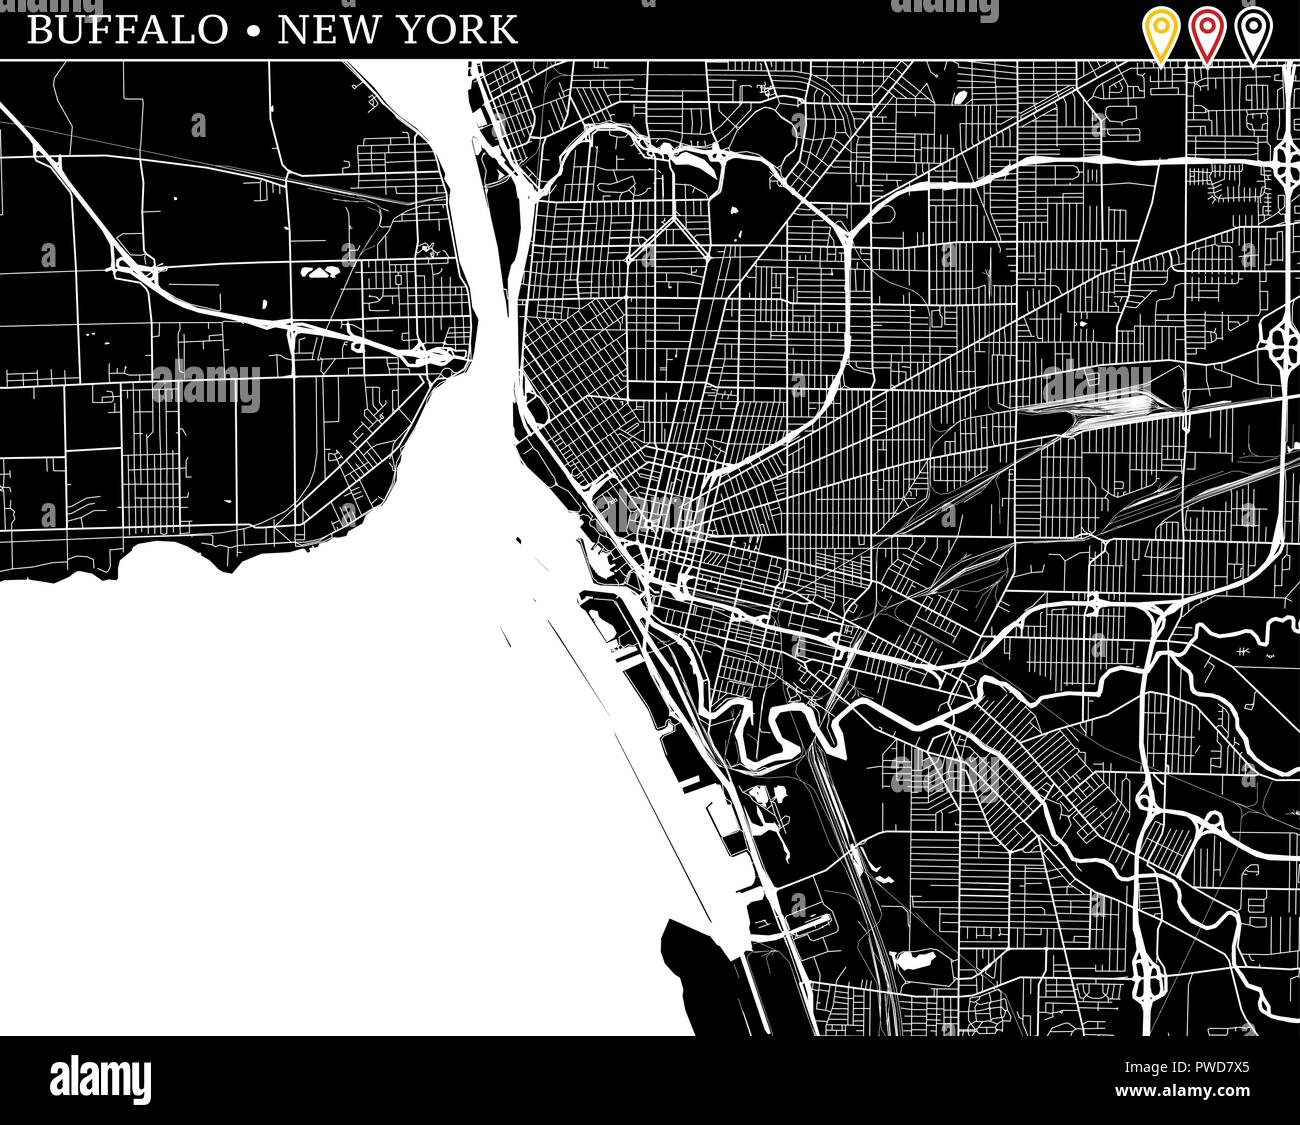 simple map of new york black and white Simple Map Of Buffalo New York Usa Black And White Version For simple map of new york black and white